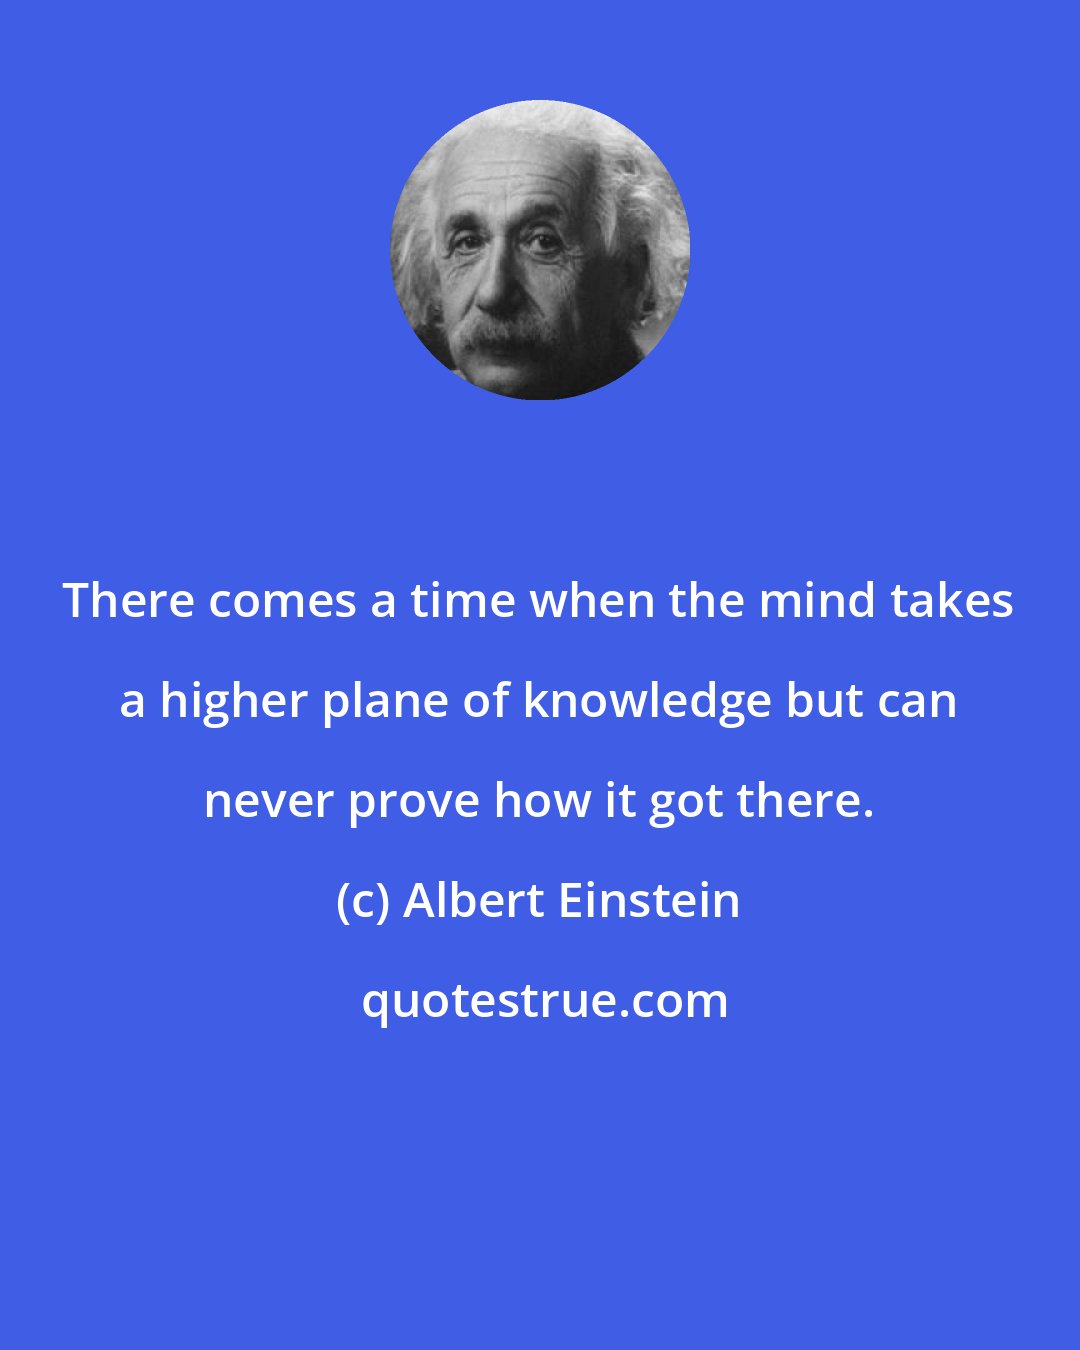 Albert Einstein: There comes a time when the mind takes a higher plane of knowledge but can never prove how it got there.